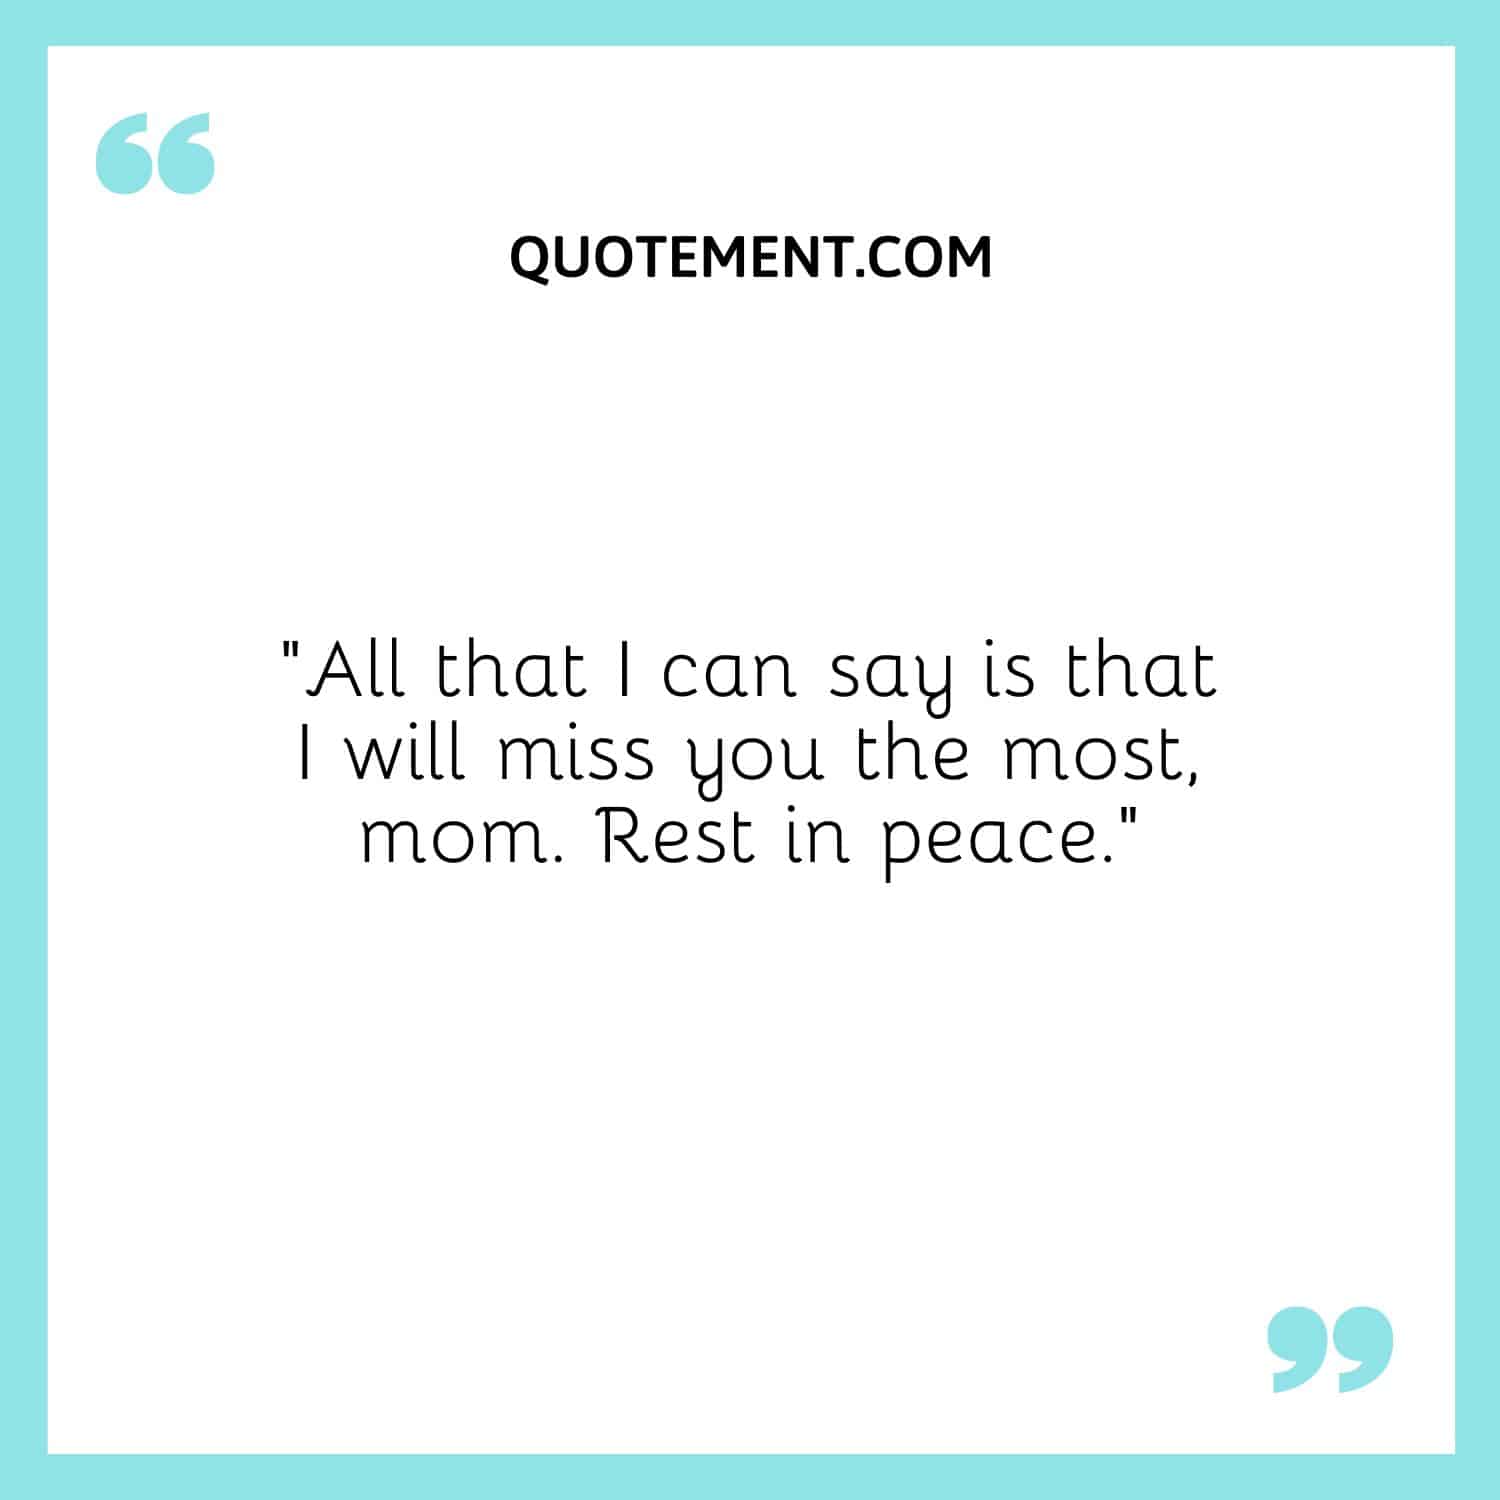 All that I can say is that I will miss you the most, mom.